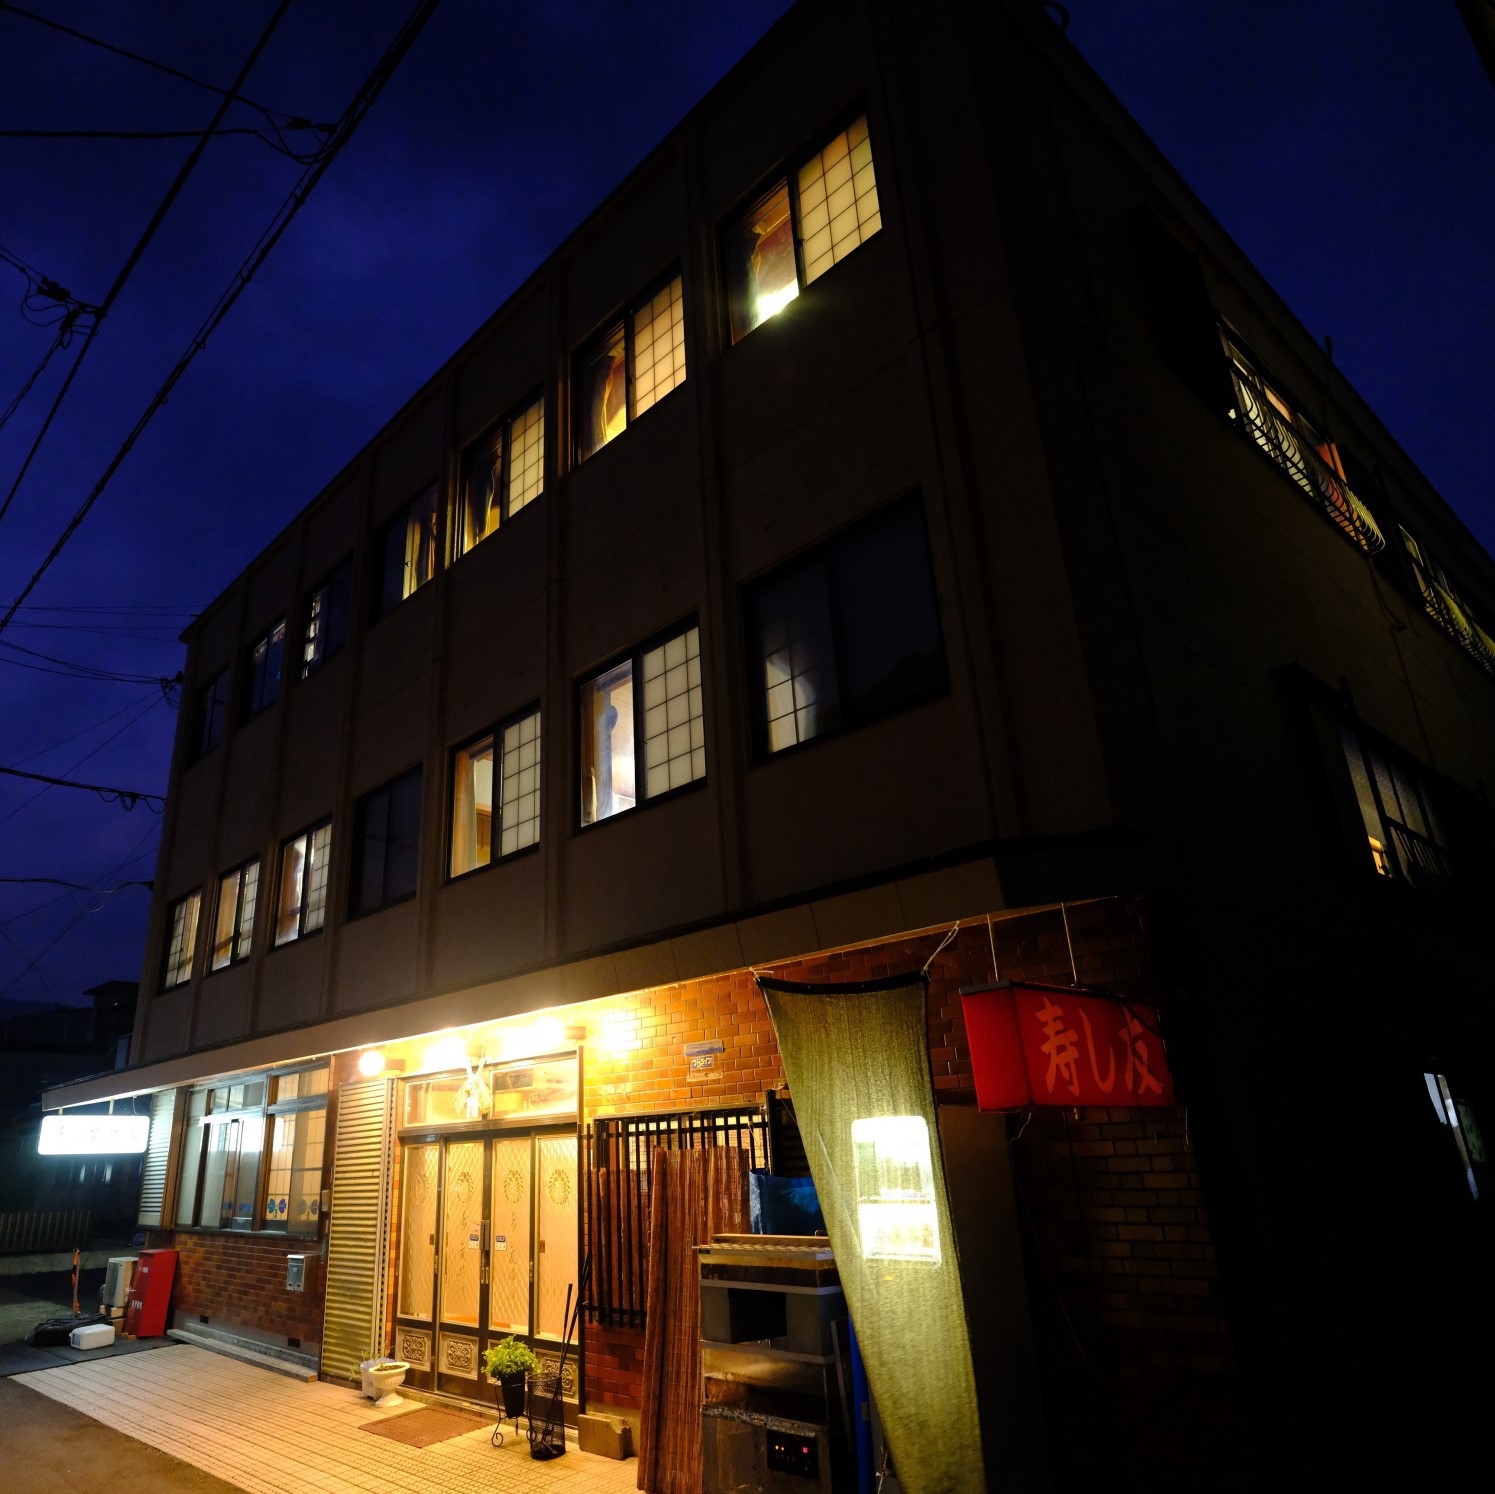 Sushitomo Ryokan Sushitomo Ryokan is a popular choice amongst travelers in Shima, whether exploring or just passing through. The property offers a high standard of service and amenities to suit the individual needs of